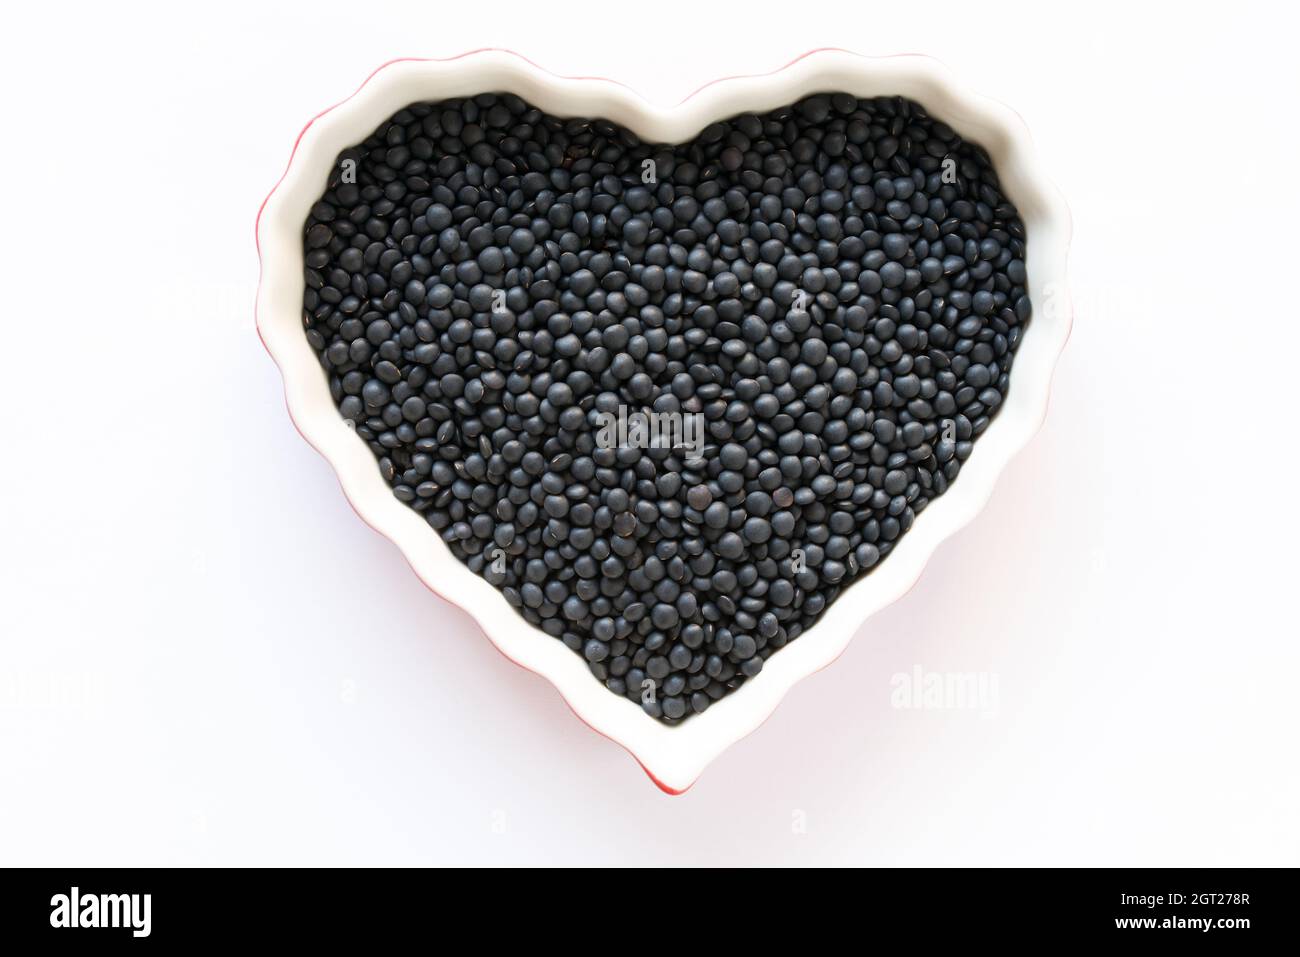 Uncooked Black Lentils In A Bowl Stock Photo